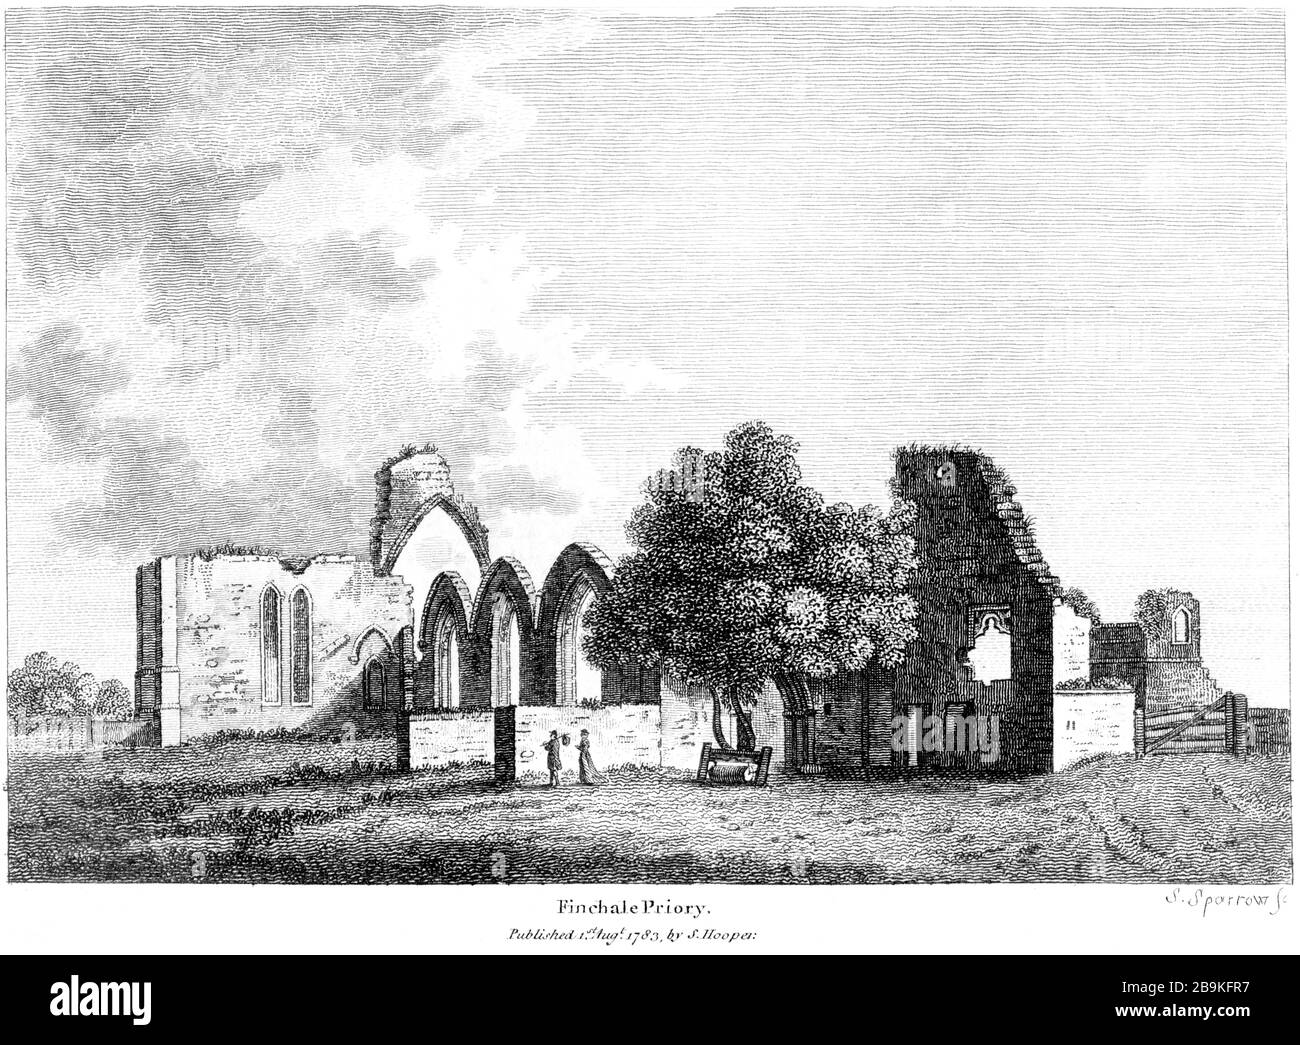 An engraving of Finchale Priory 1783 scanned at high resolution from a book published around 1786. This image is believed to be free of all copyright. Stock Photo